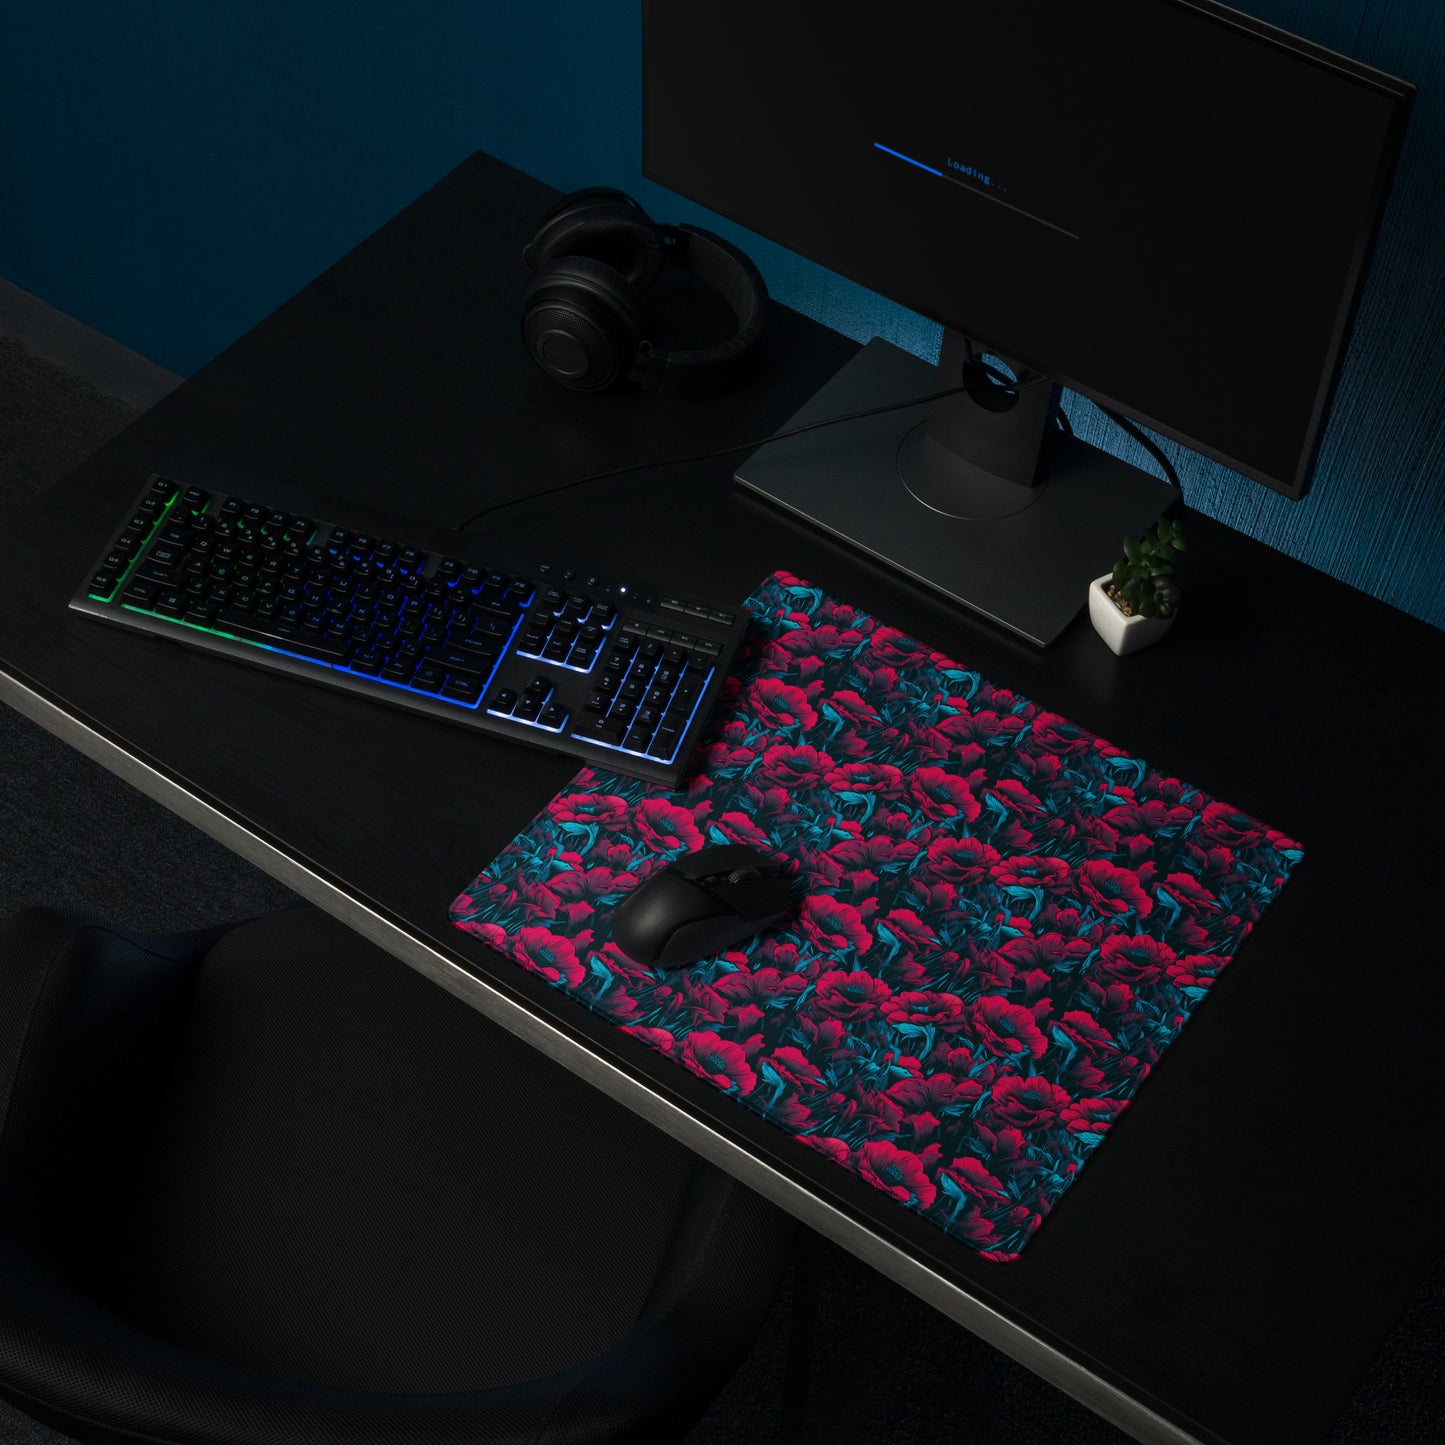 A 18" x 16" desk pad with a red and blue floral pattern sitting on a desk.